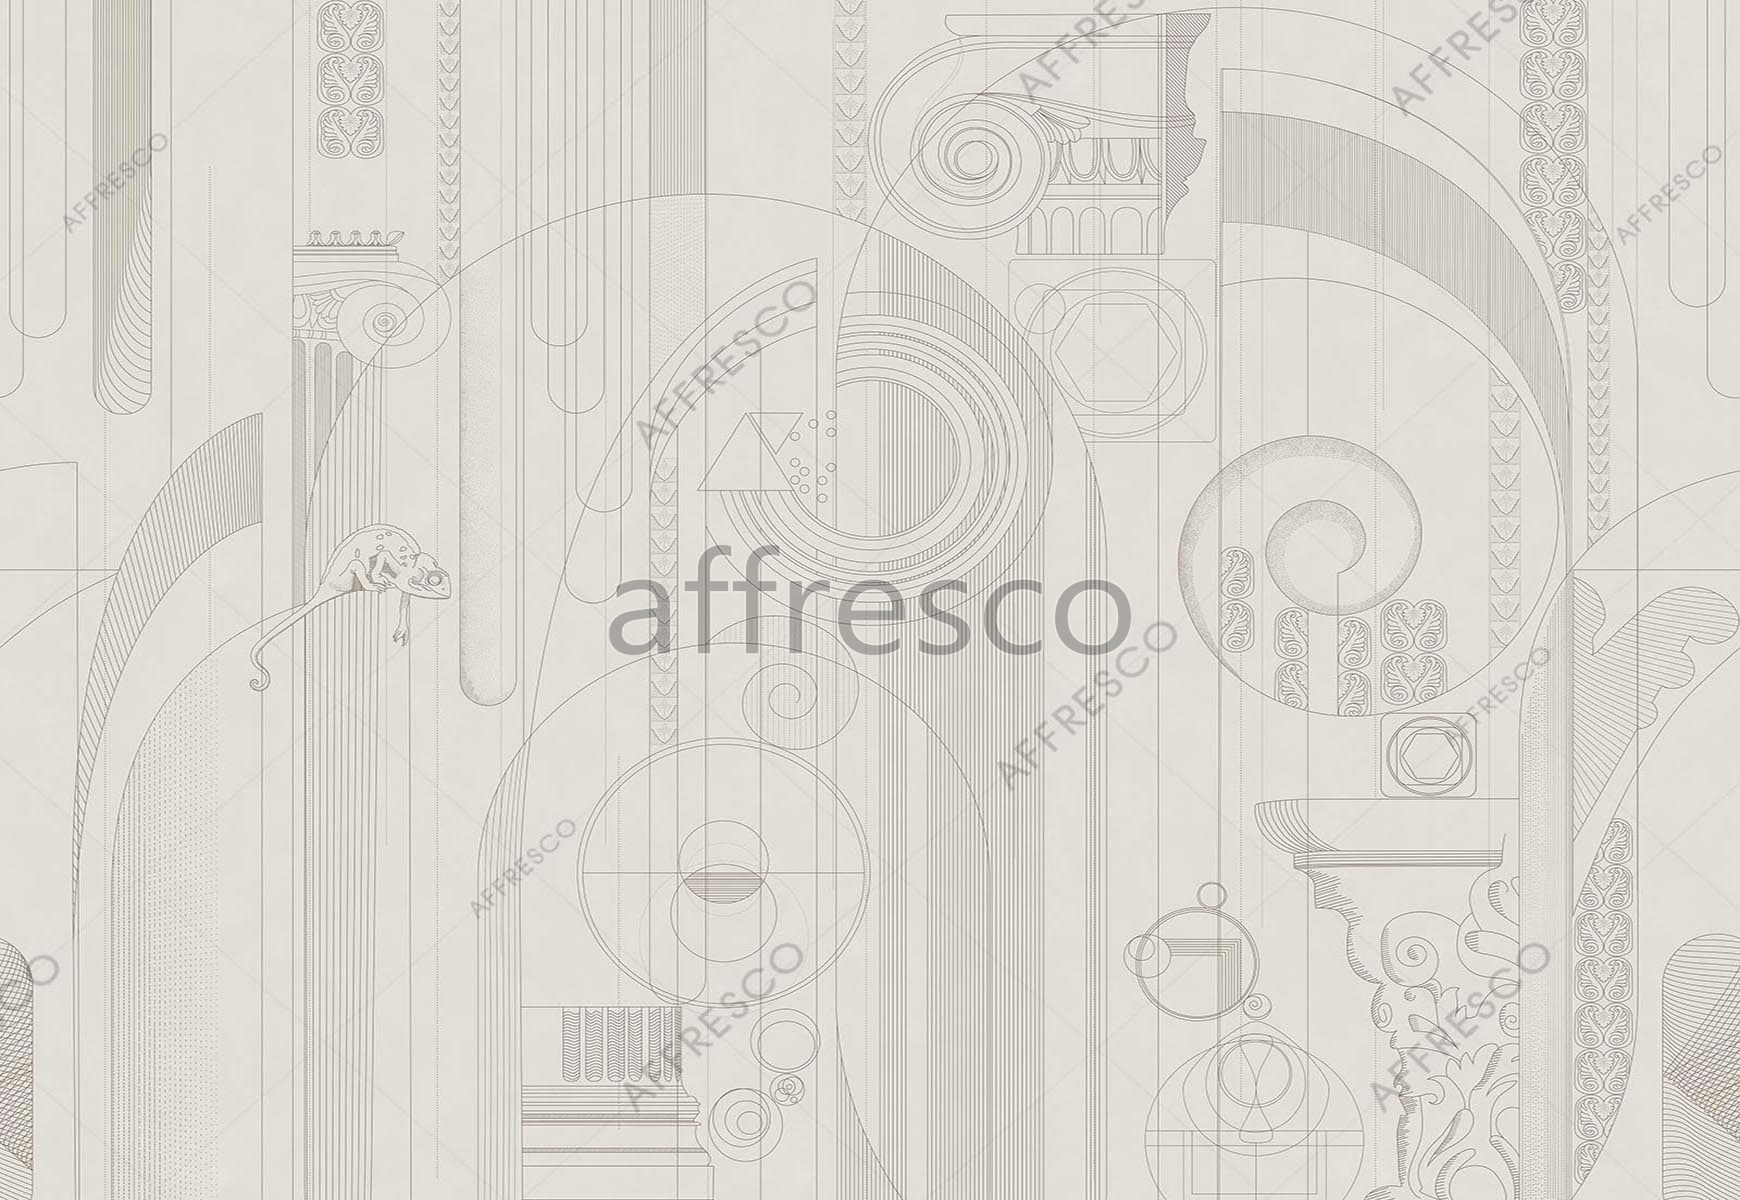 ID139211 | Geometry | abstraction | Affresco Factory